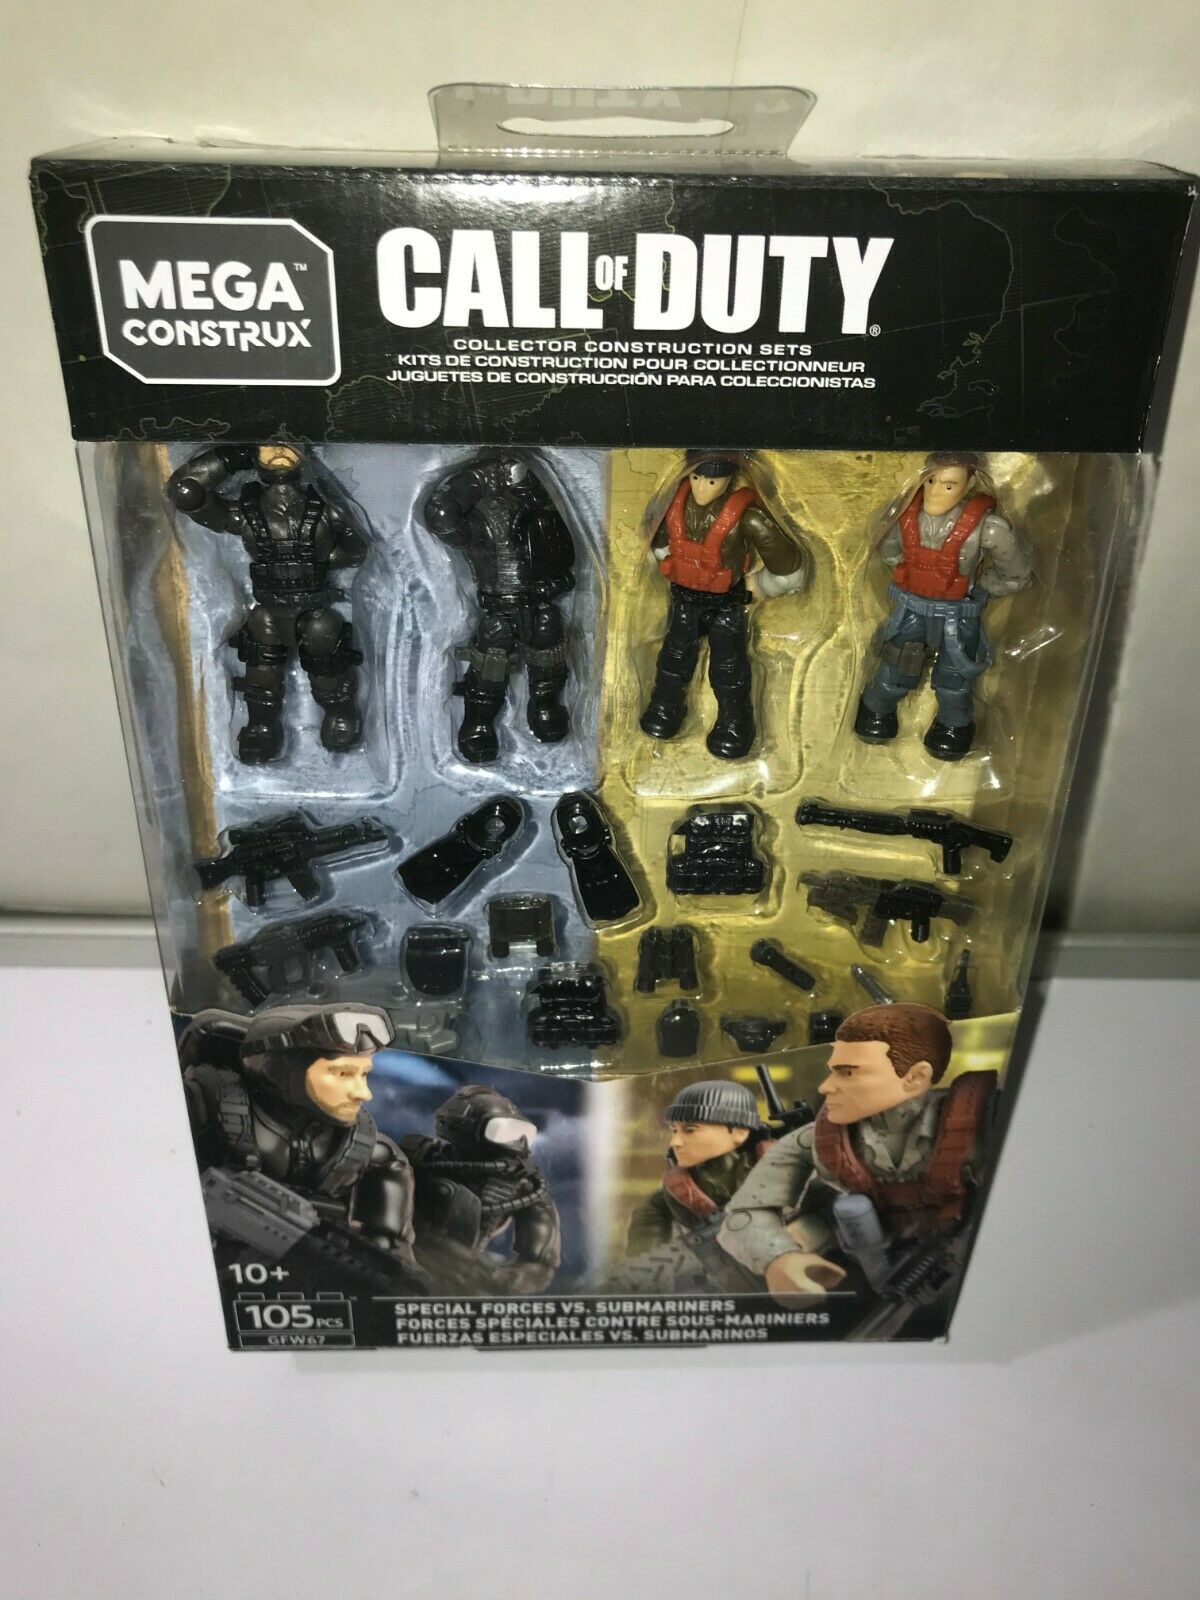 Mega Construx Cod Call Of Duty Special Forces Vs Submariners #gfw67 Set New!